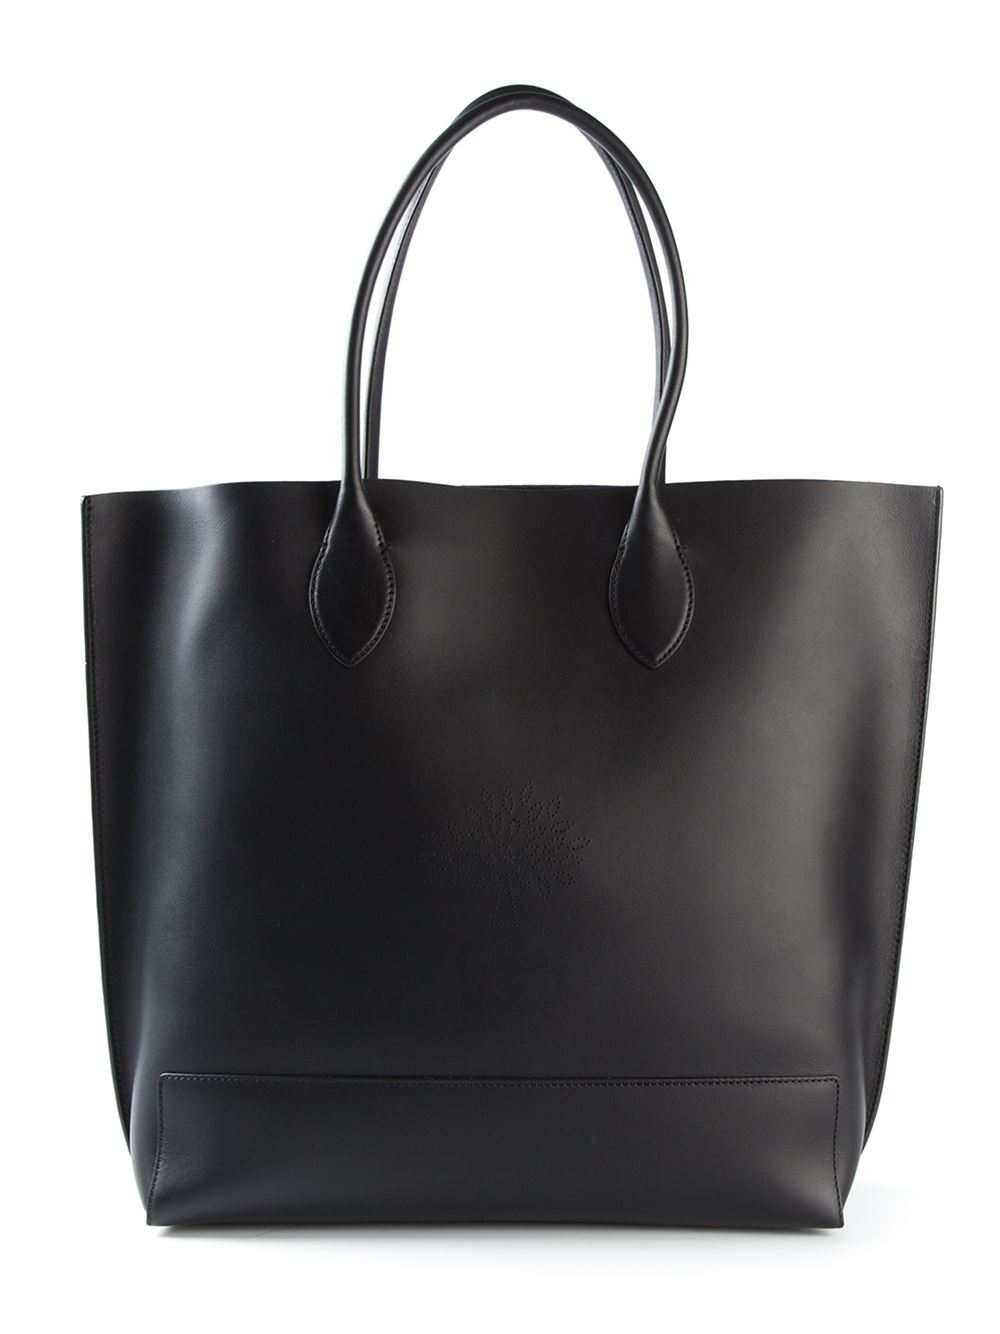 Lyst - Mulberry &#39;Blossom&#39; Shopper Tote in Black